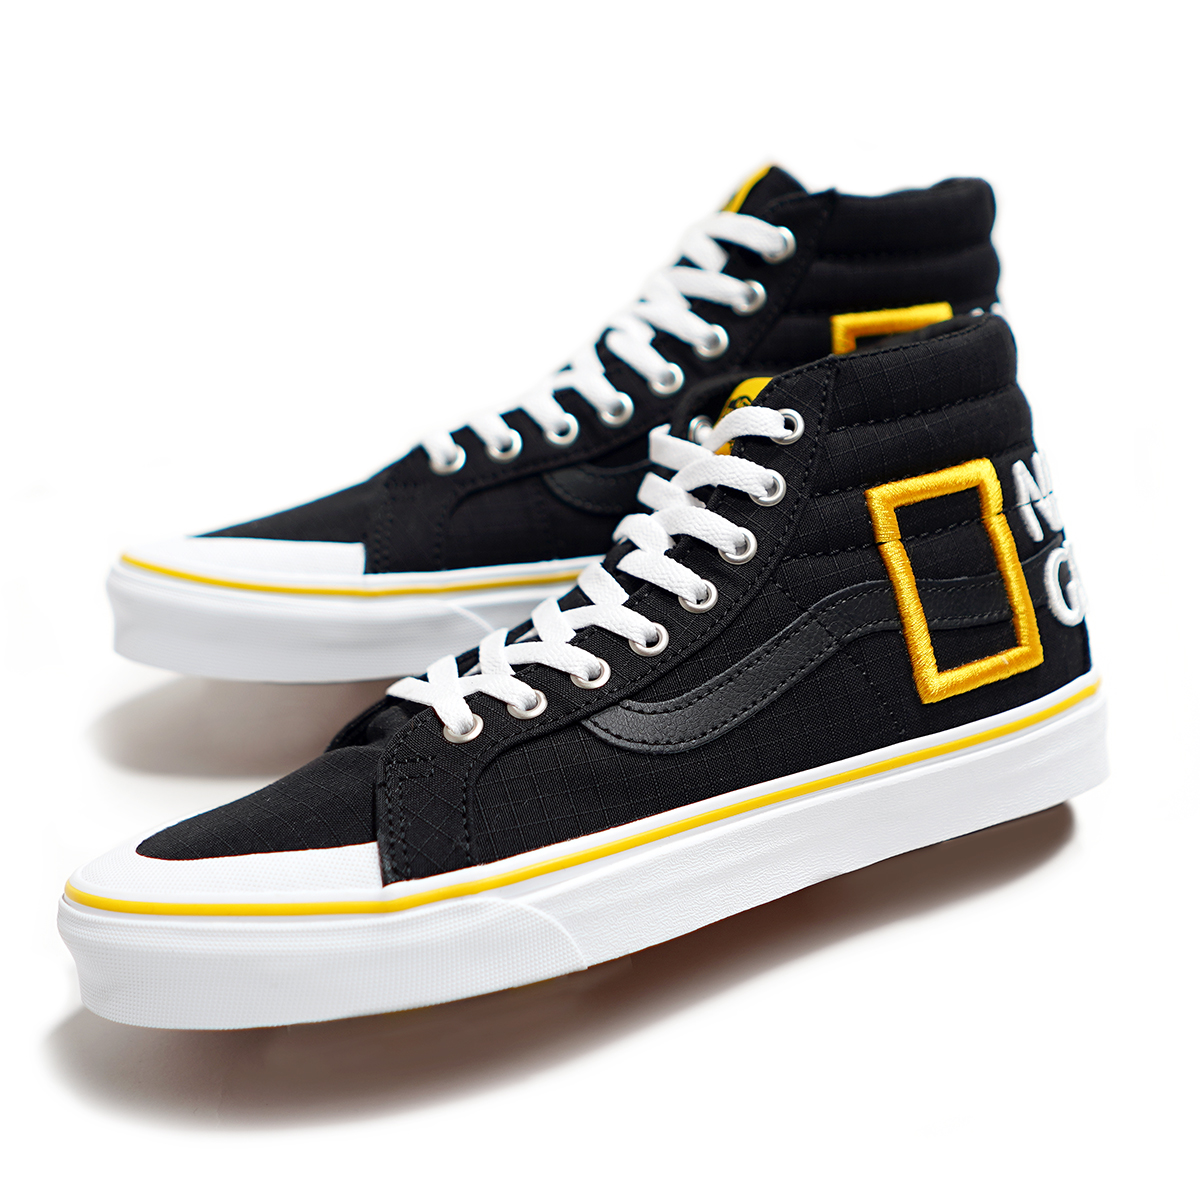 NATIONAL GEOGRAPHIC SK8-HI REISSUE OLD 